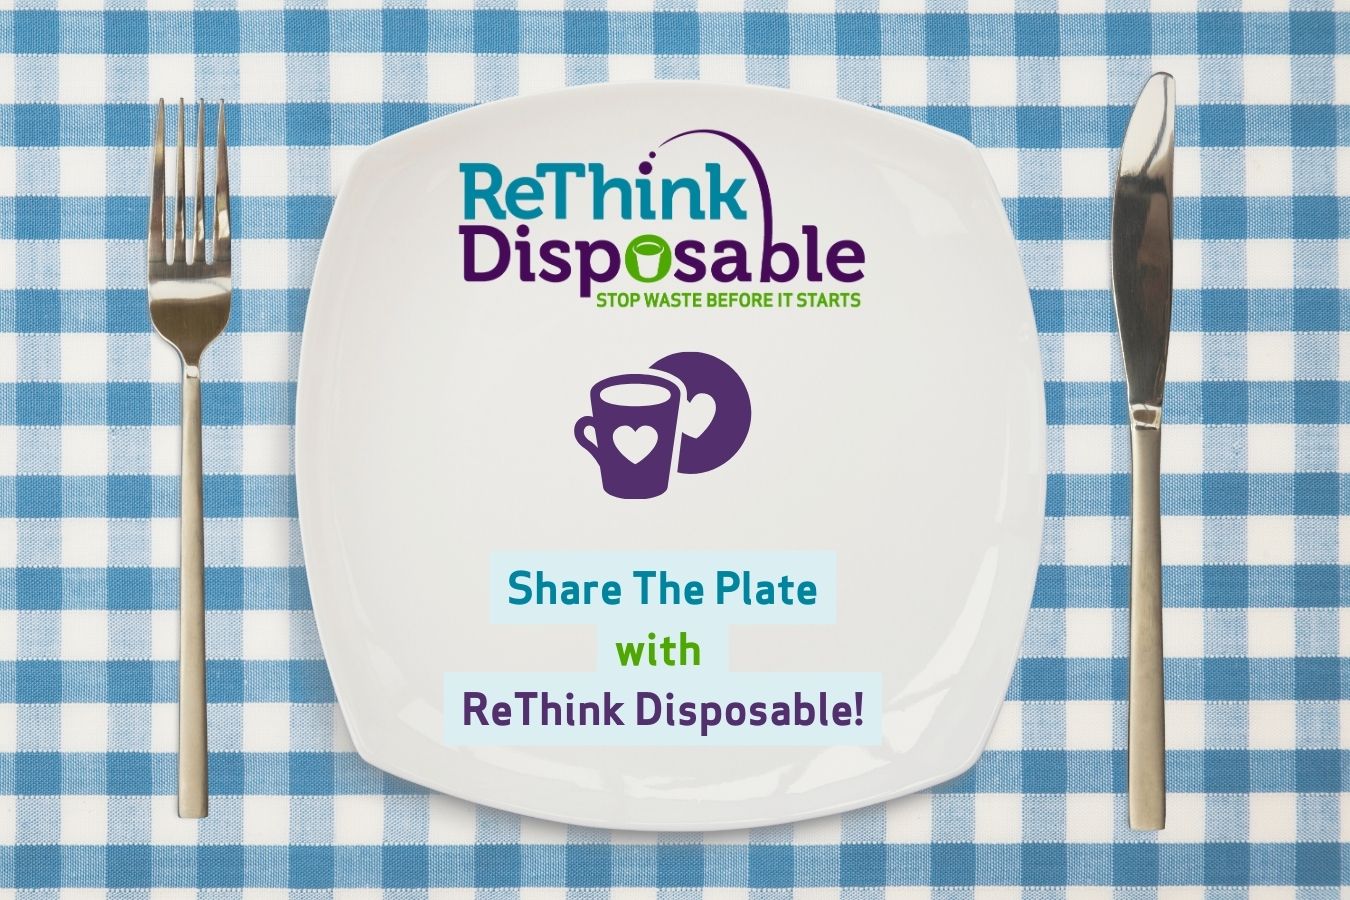 share the plate with rethink disposable: image of a plate and cutlery with ReThink Disposable logo